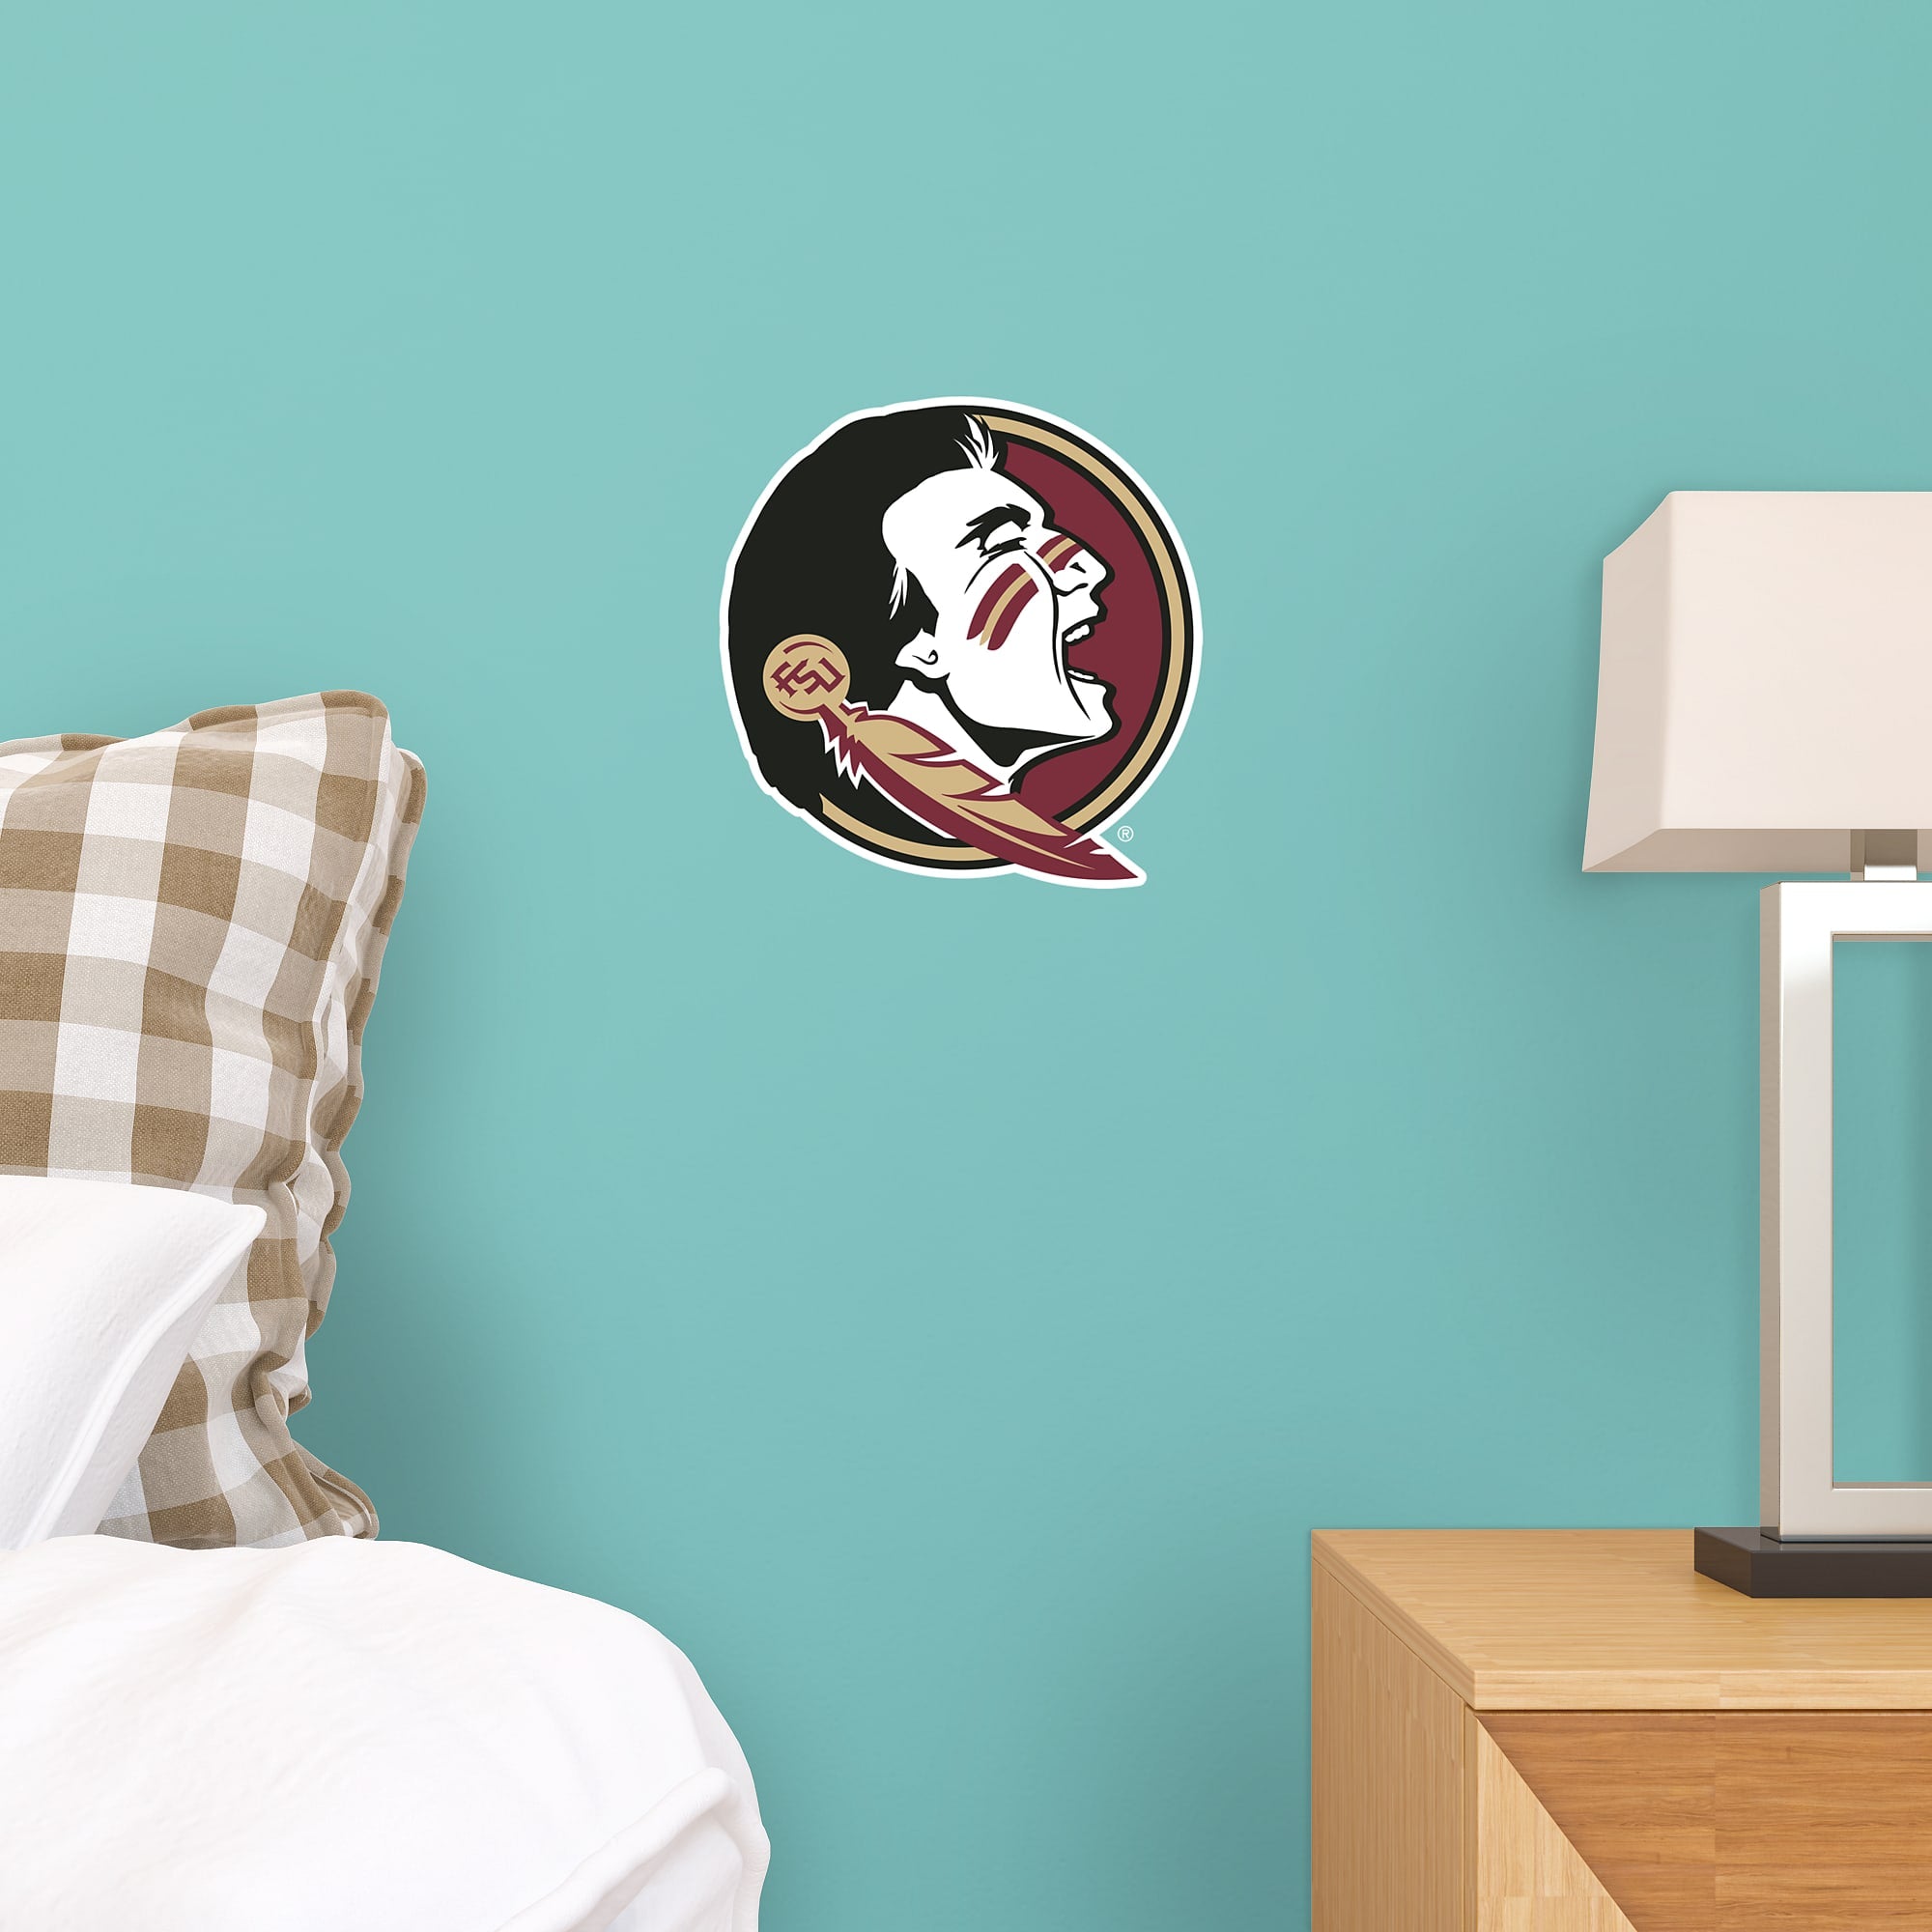 Florida State Seminoles: Logo - Officially Licensed Removable Wall Decal 11.0"W x 11.0"H by Fathead | Vinyl